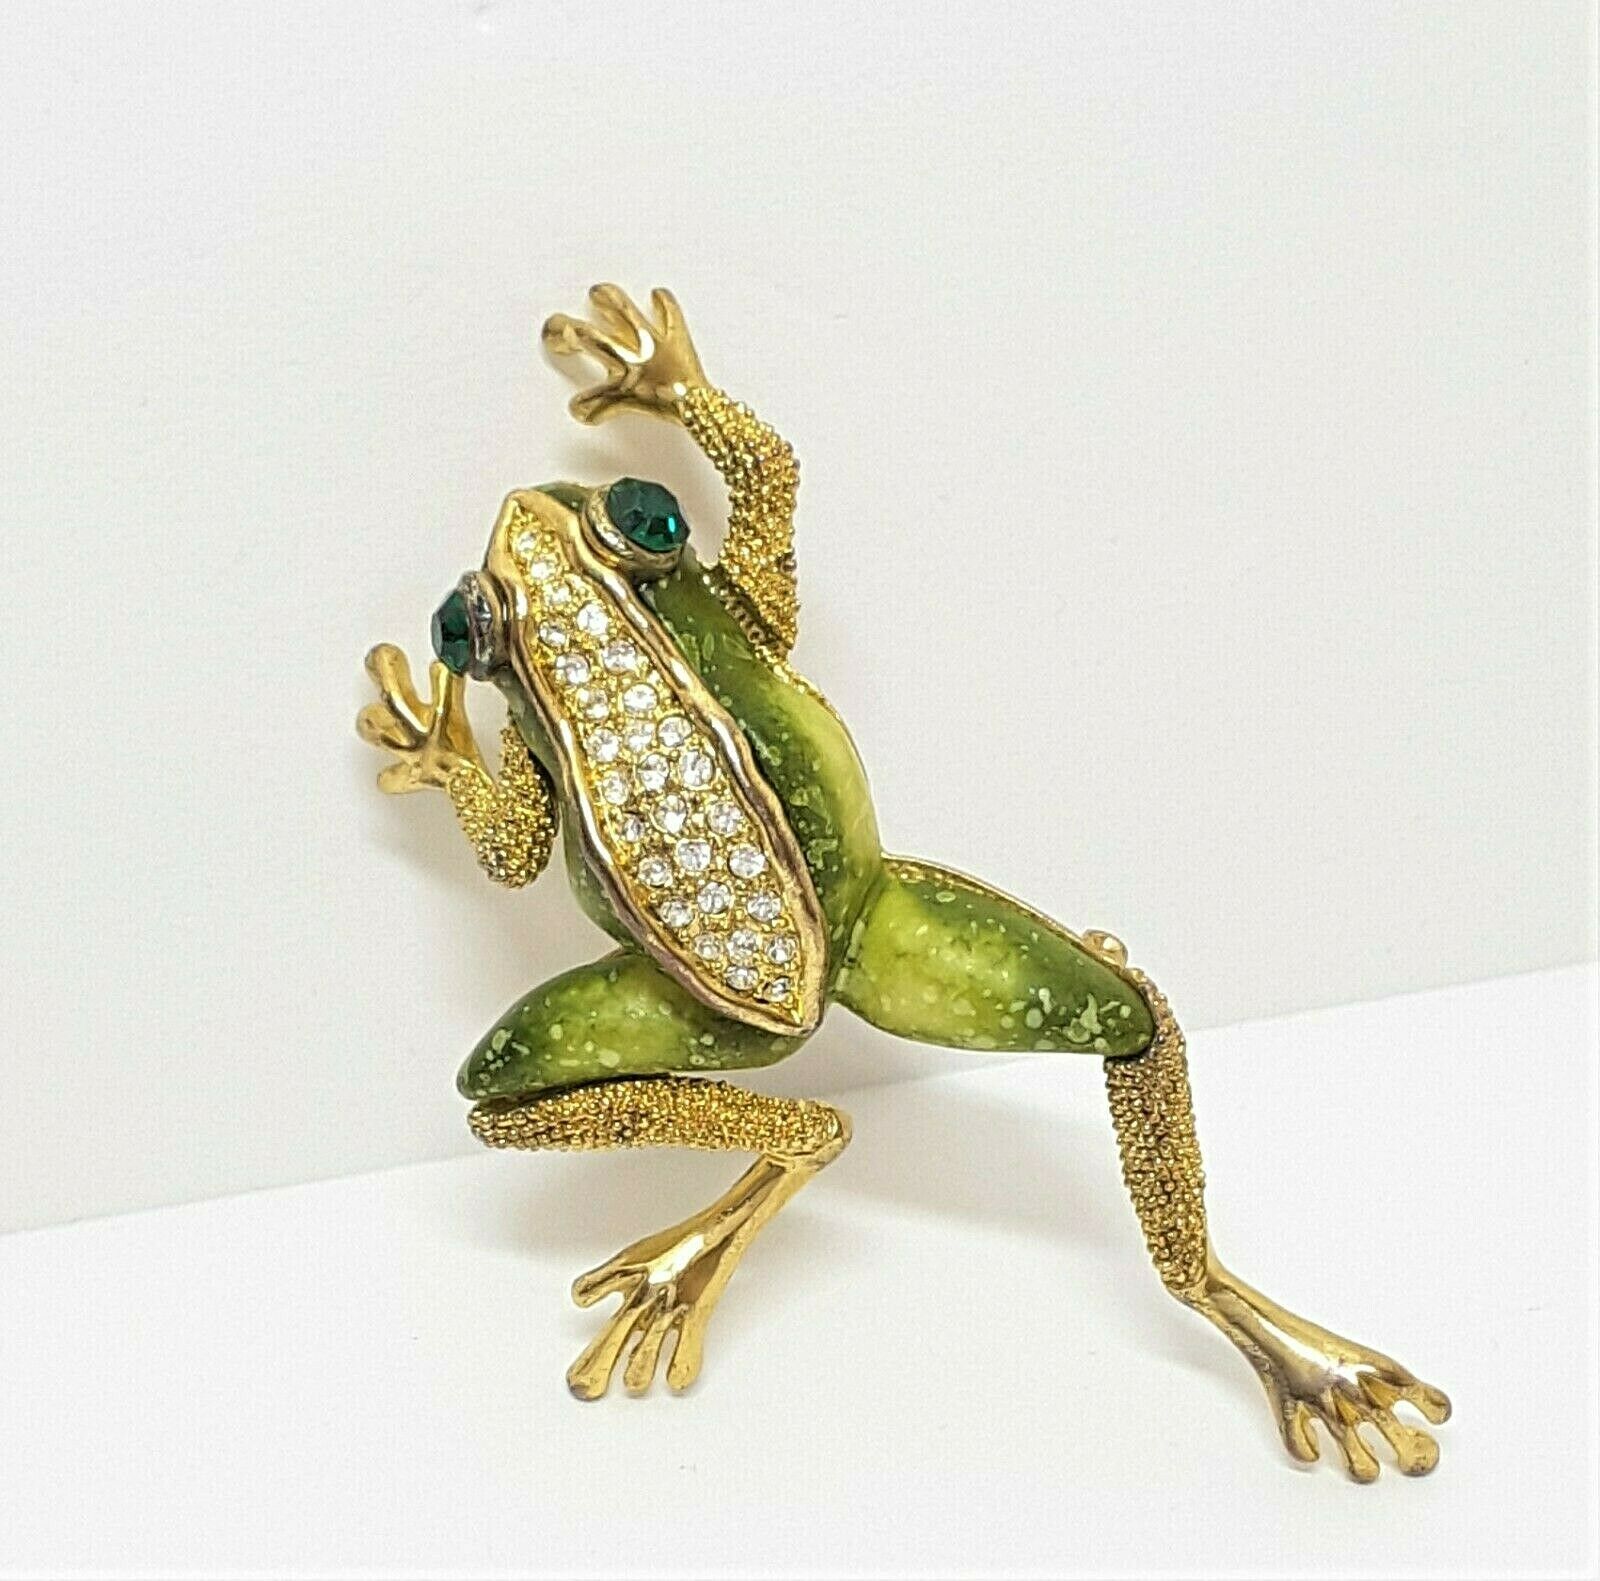 Vintage Rhinestone Frog Brooch Pin 3.5"x2", Exquisite Evc